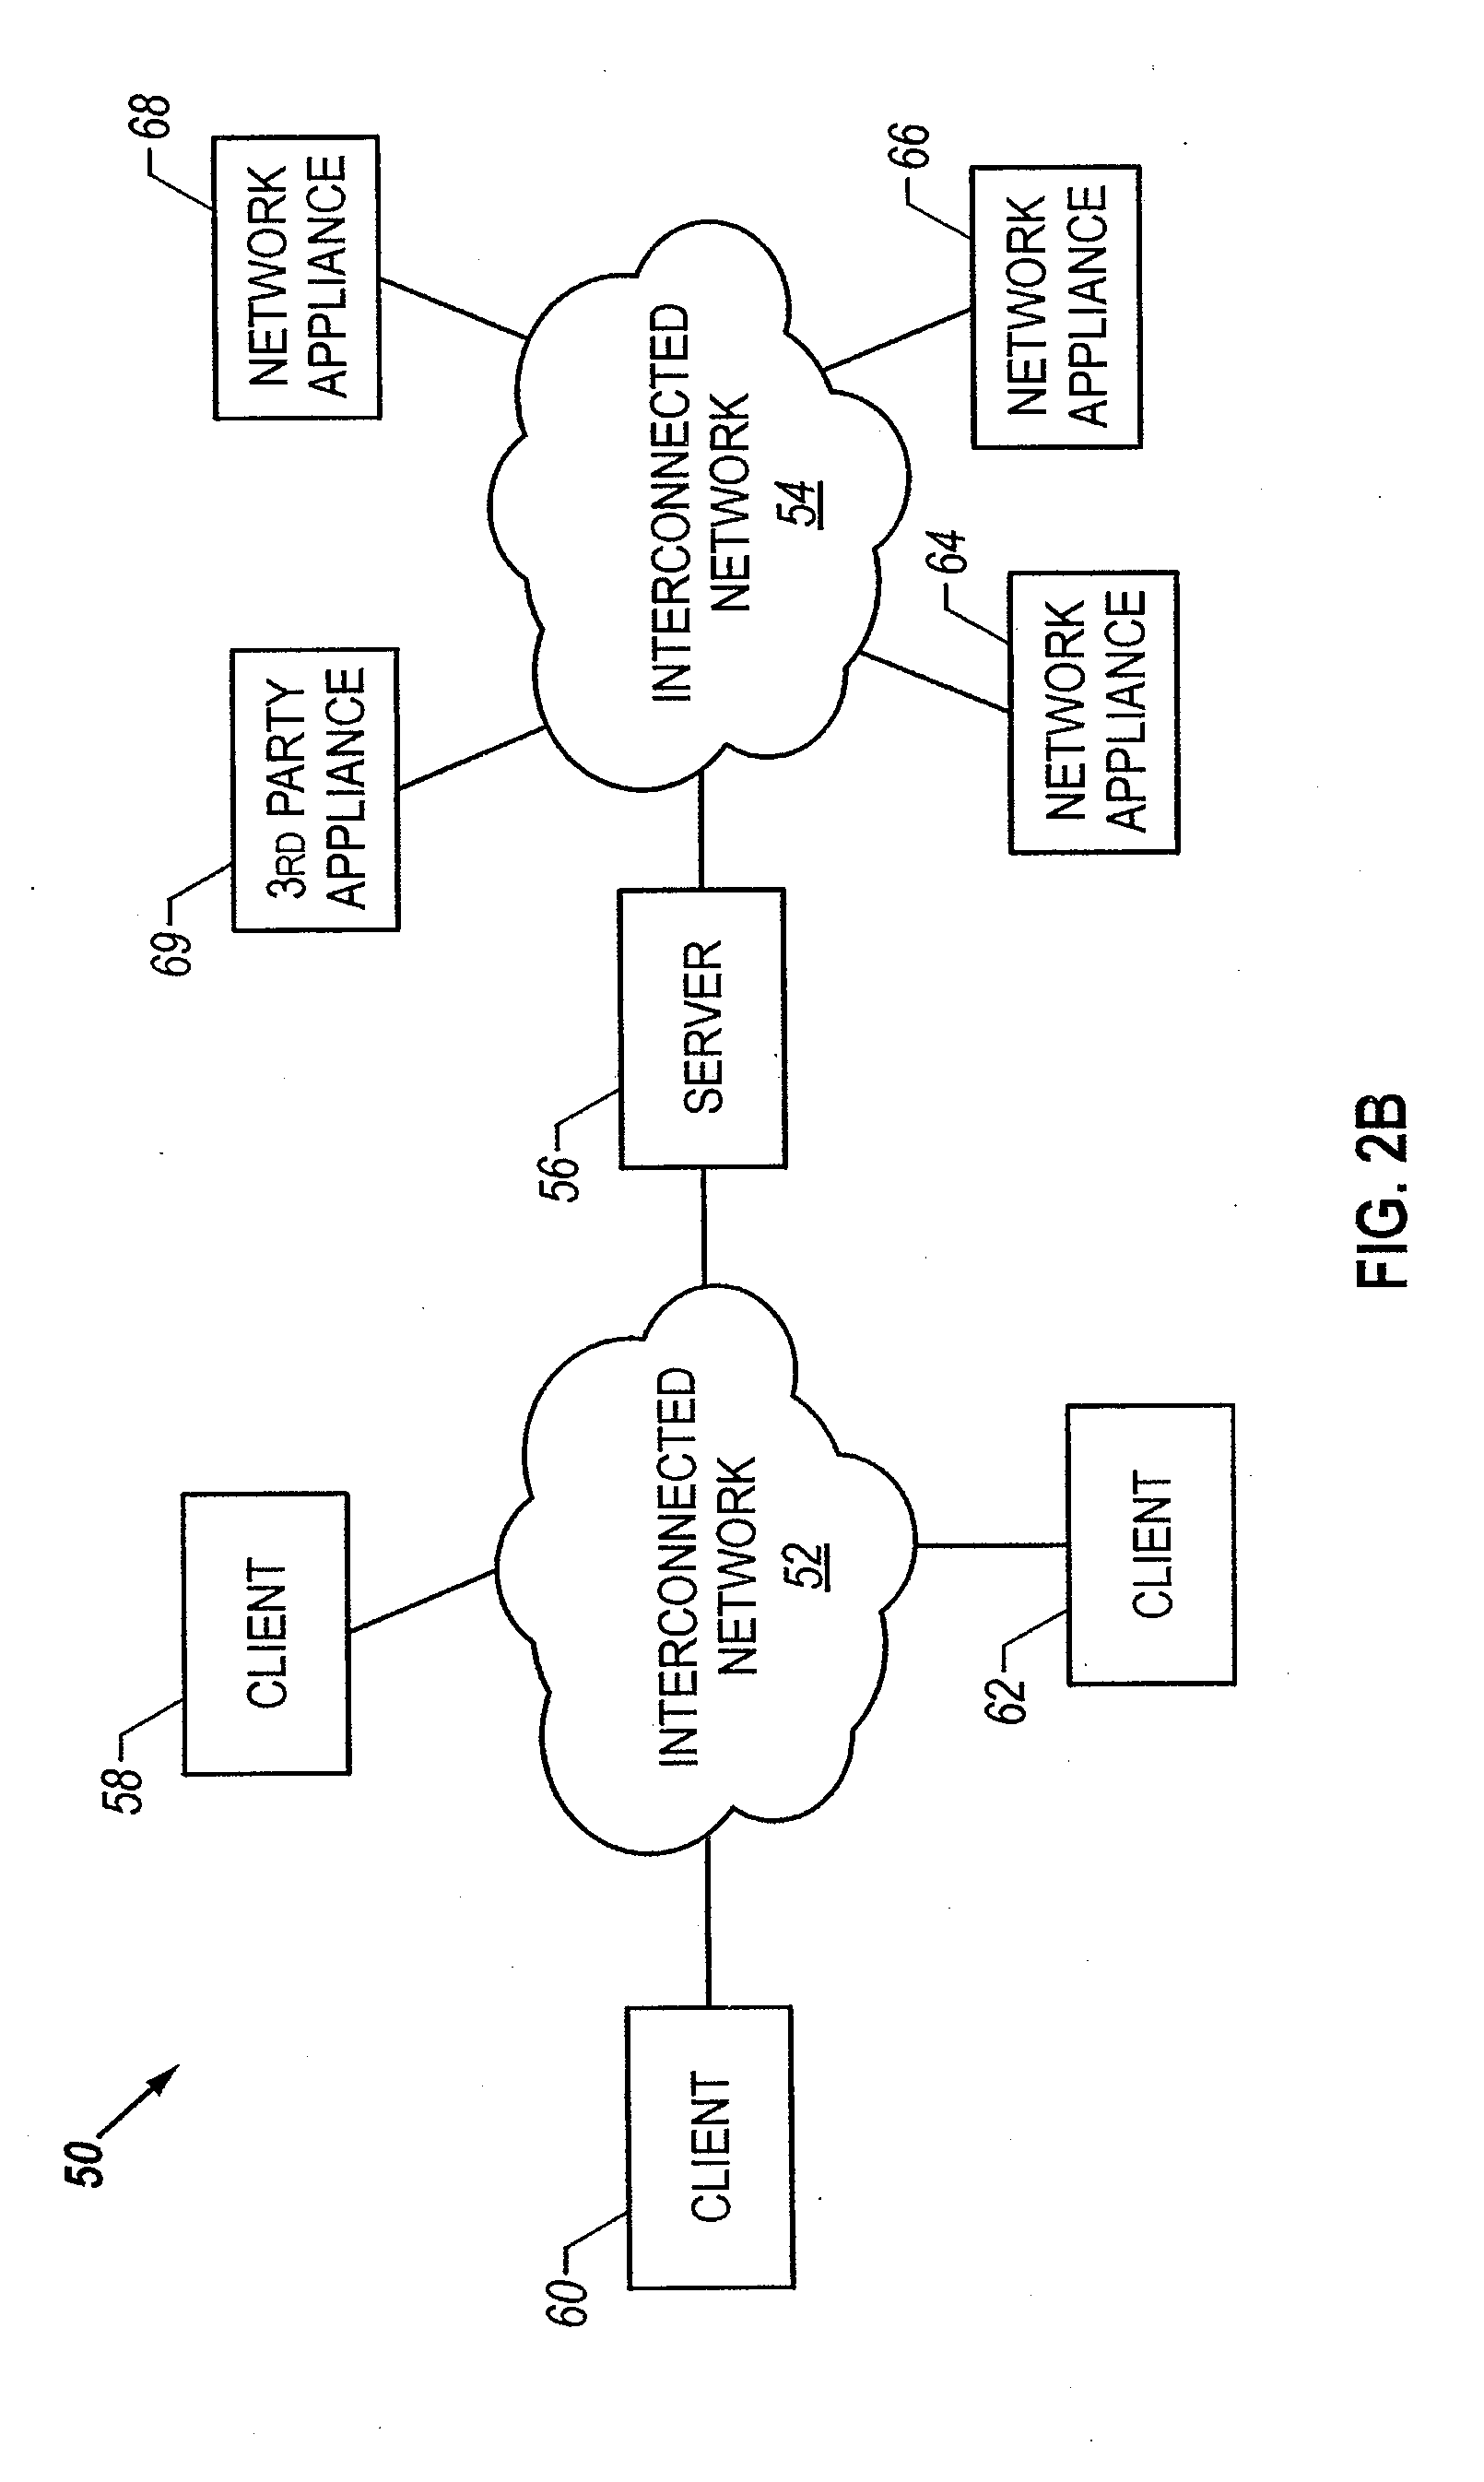 Method and apparatus for replay of historical data